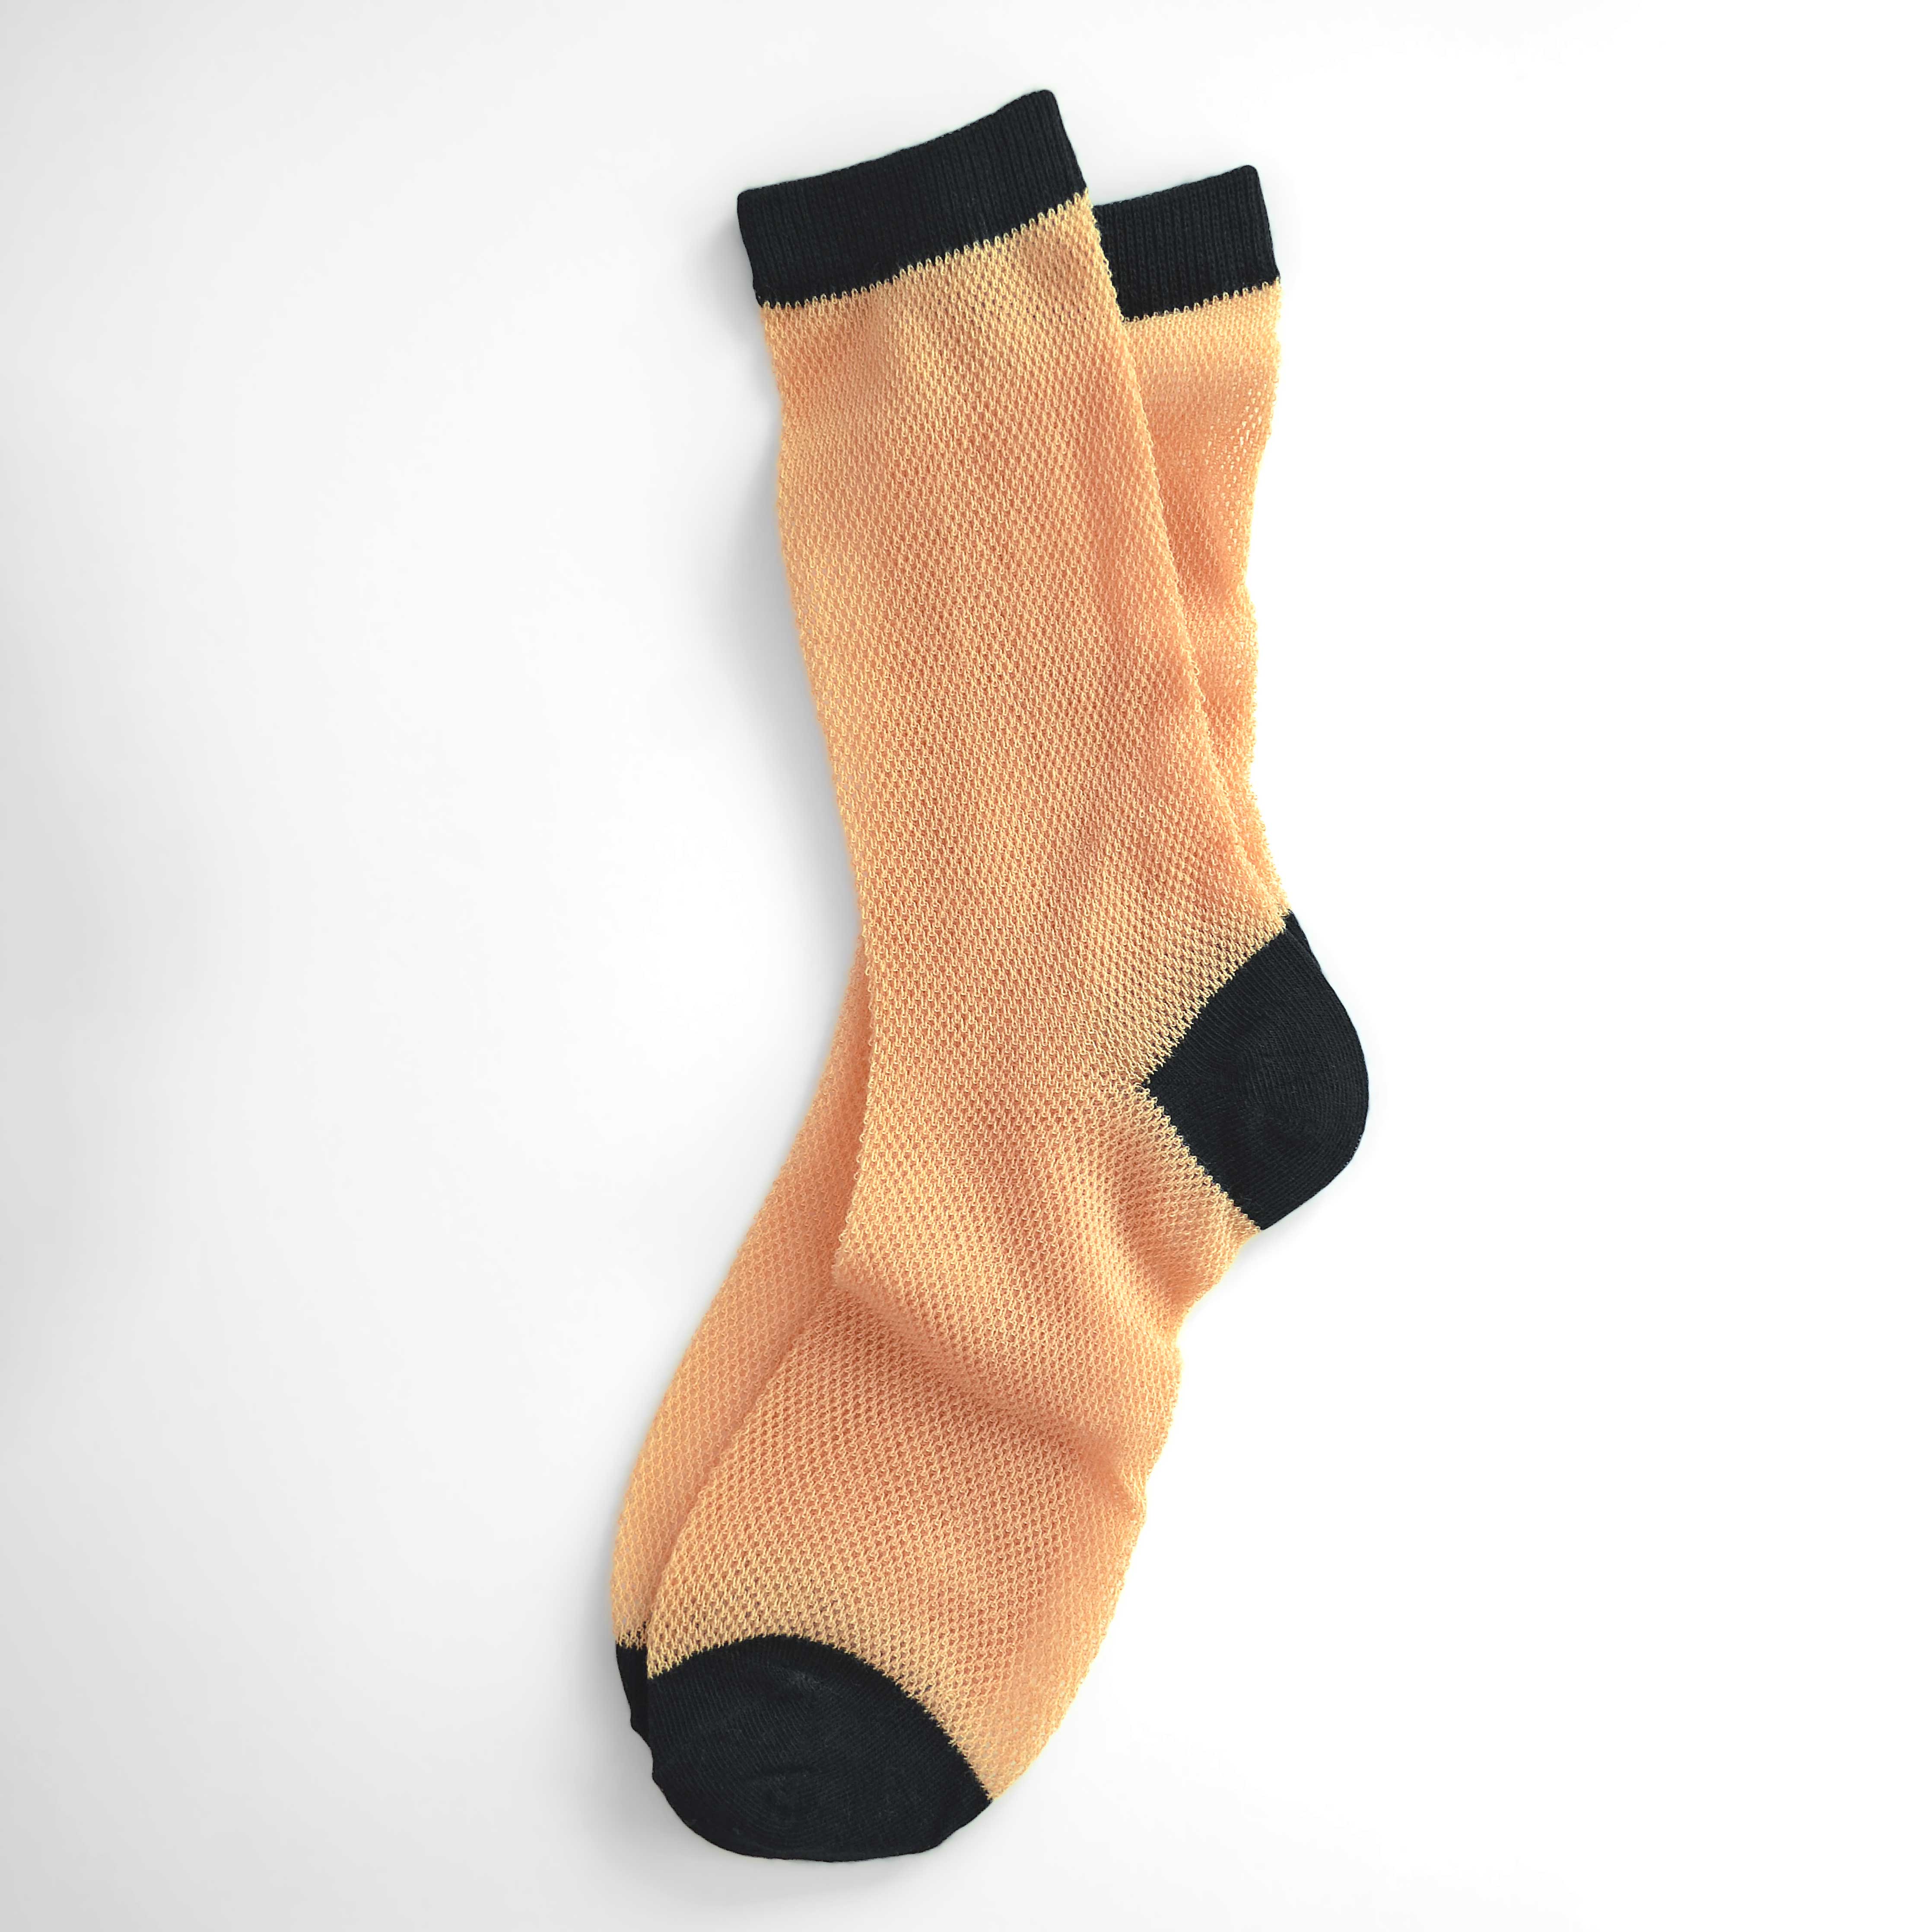 'Valencia' mid-crew socks, showcasing an open mesh sheer design in Cantaloupe, Pink, and Purple, effortlessly blending breathability and chic style. Size: Small (US women’s shoe size: 4-8).